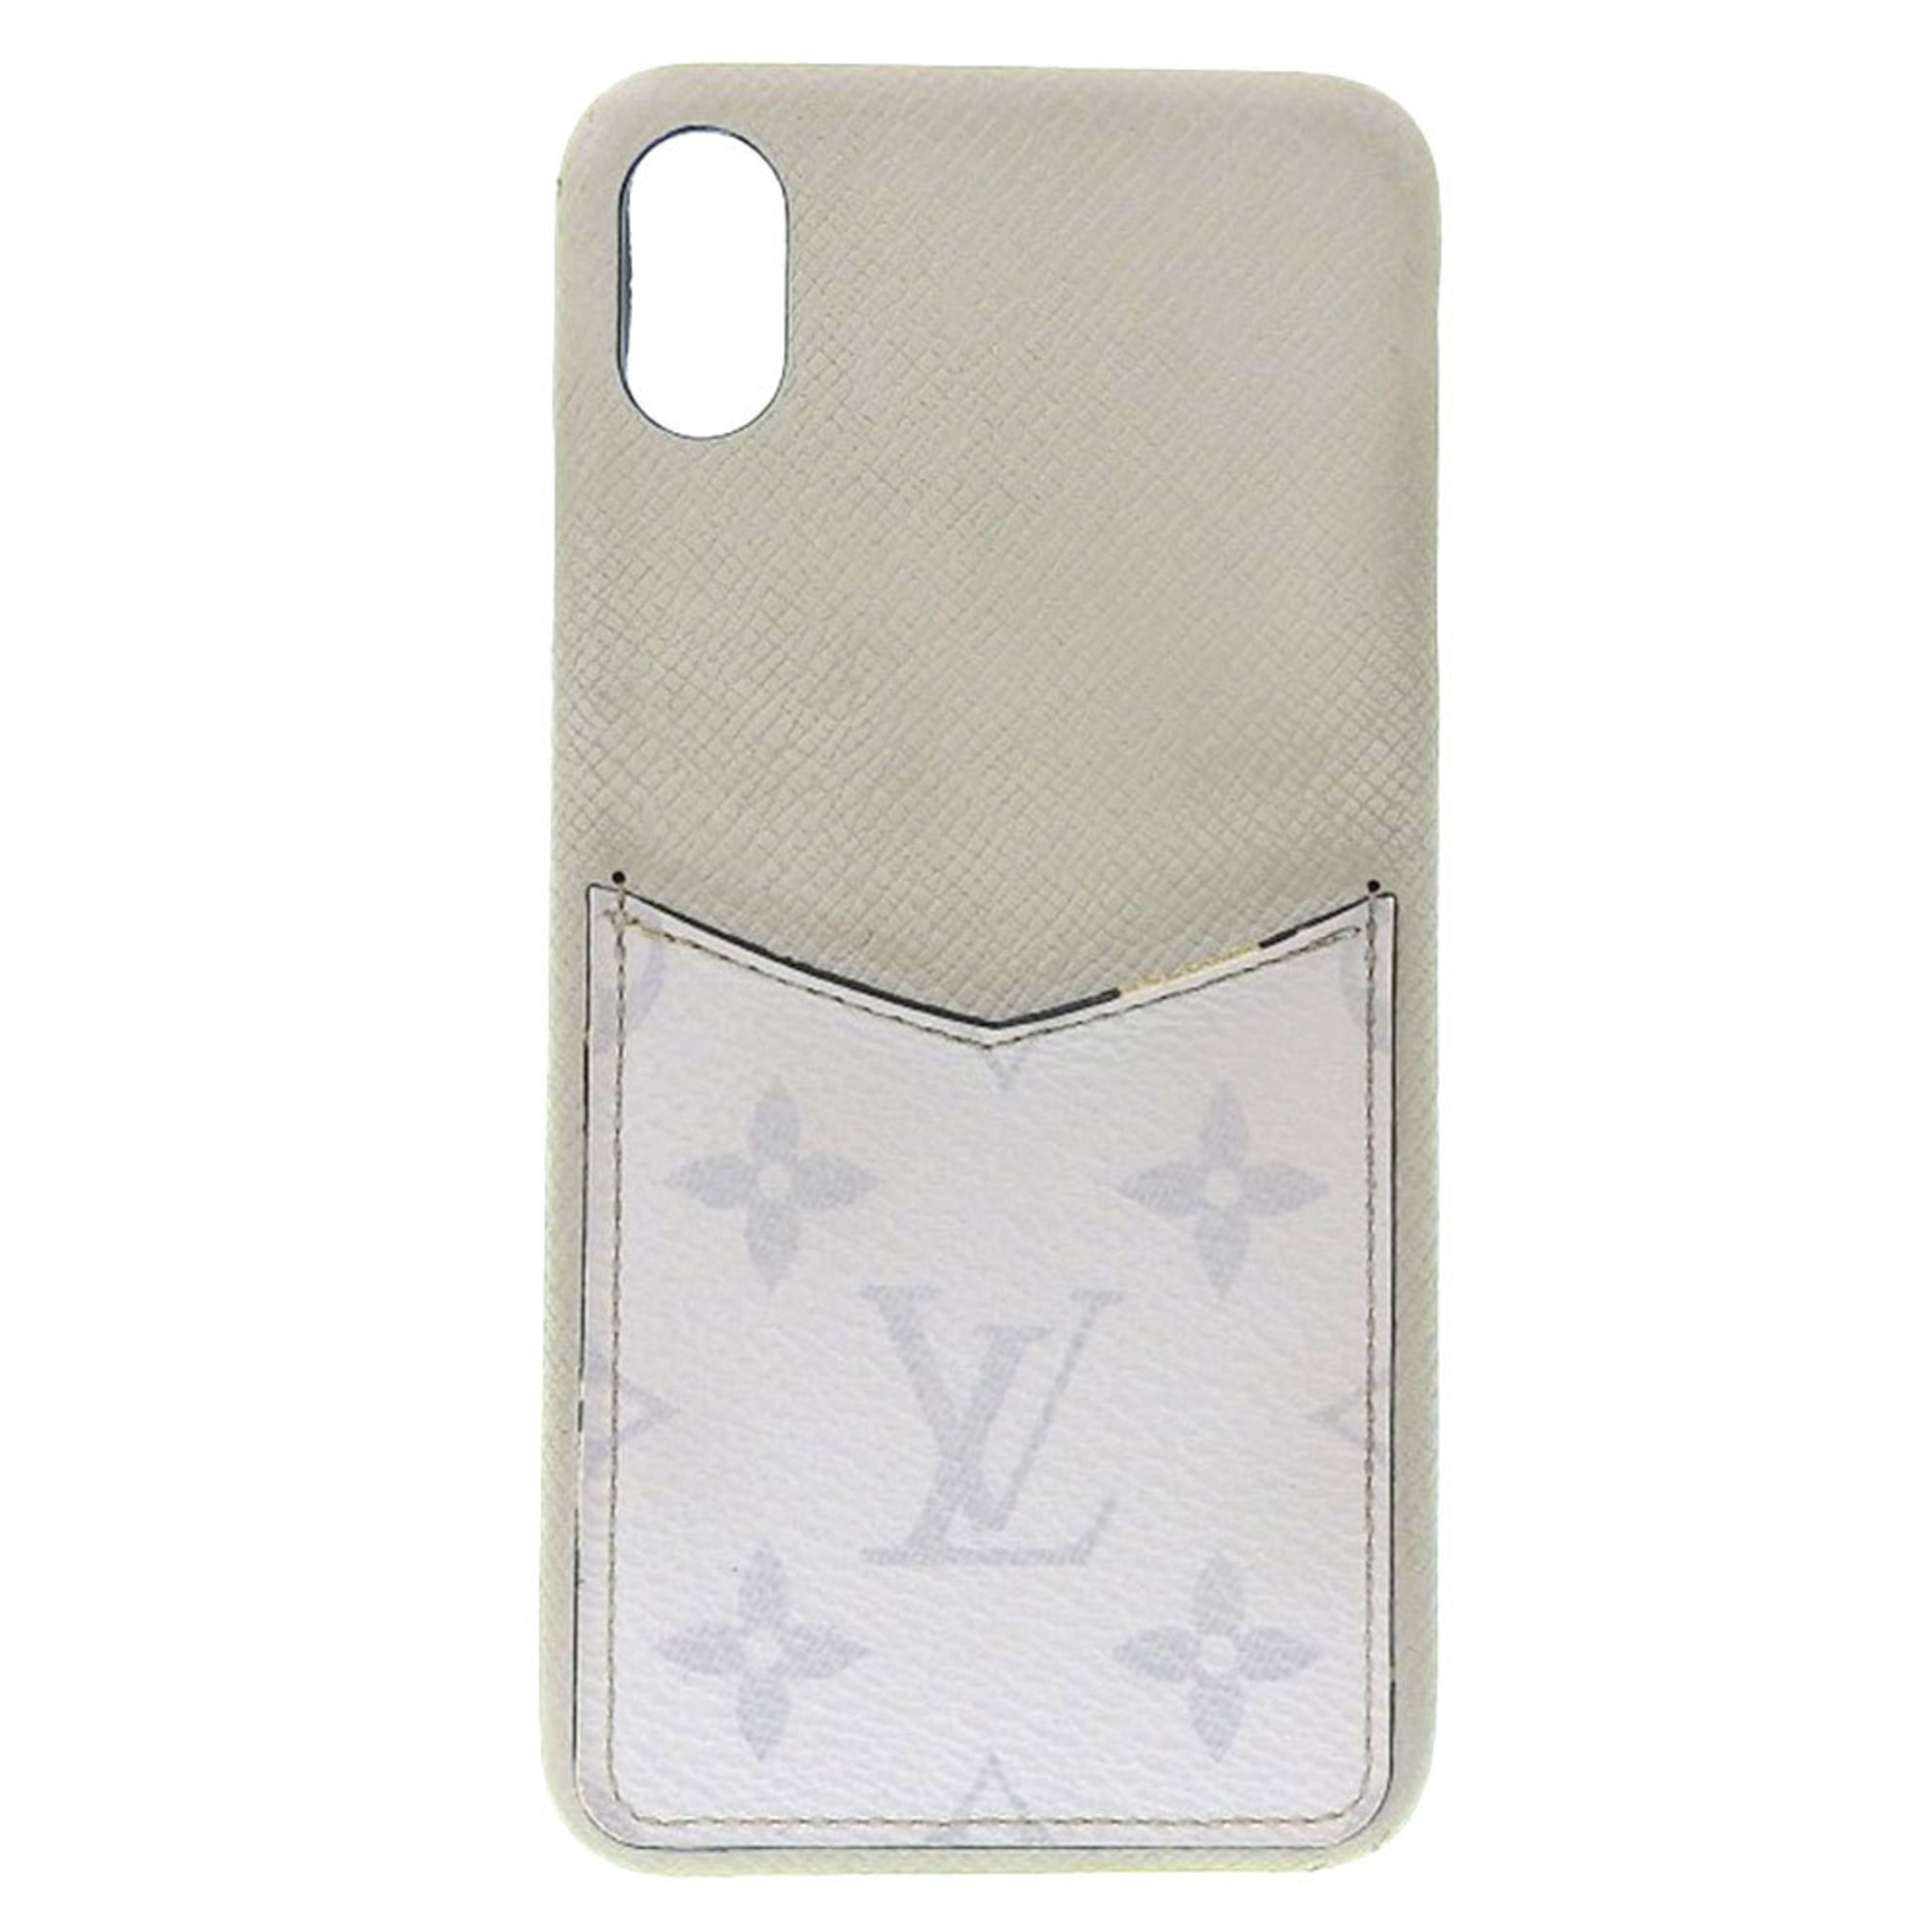 lv case  Mobile Accessories Prices and Deals  Mobile  Gadgets Jun 2023   Shopee Singapore